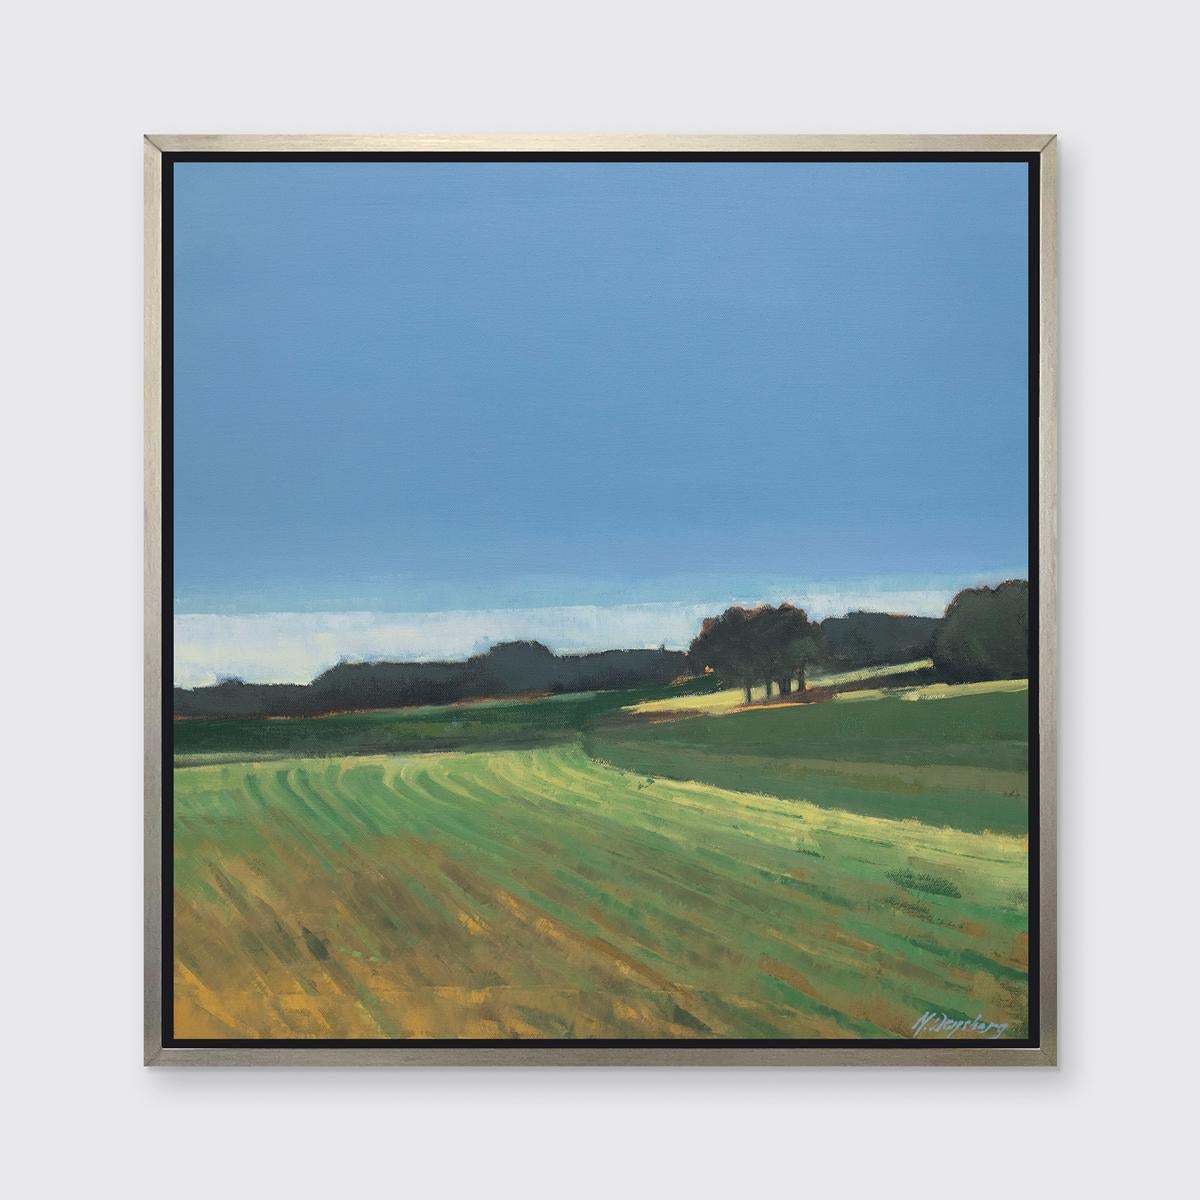 Molly Doe Wensberg Landscape Print - "Cropped Fields" Framed Limited Edition Print, 24" x 24"